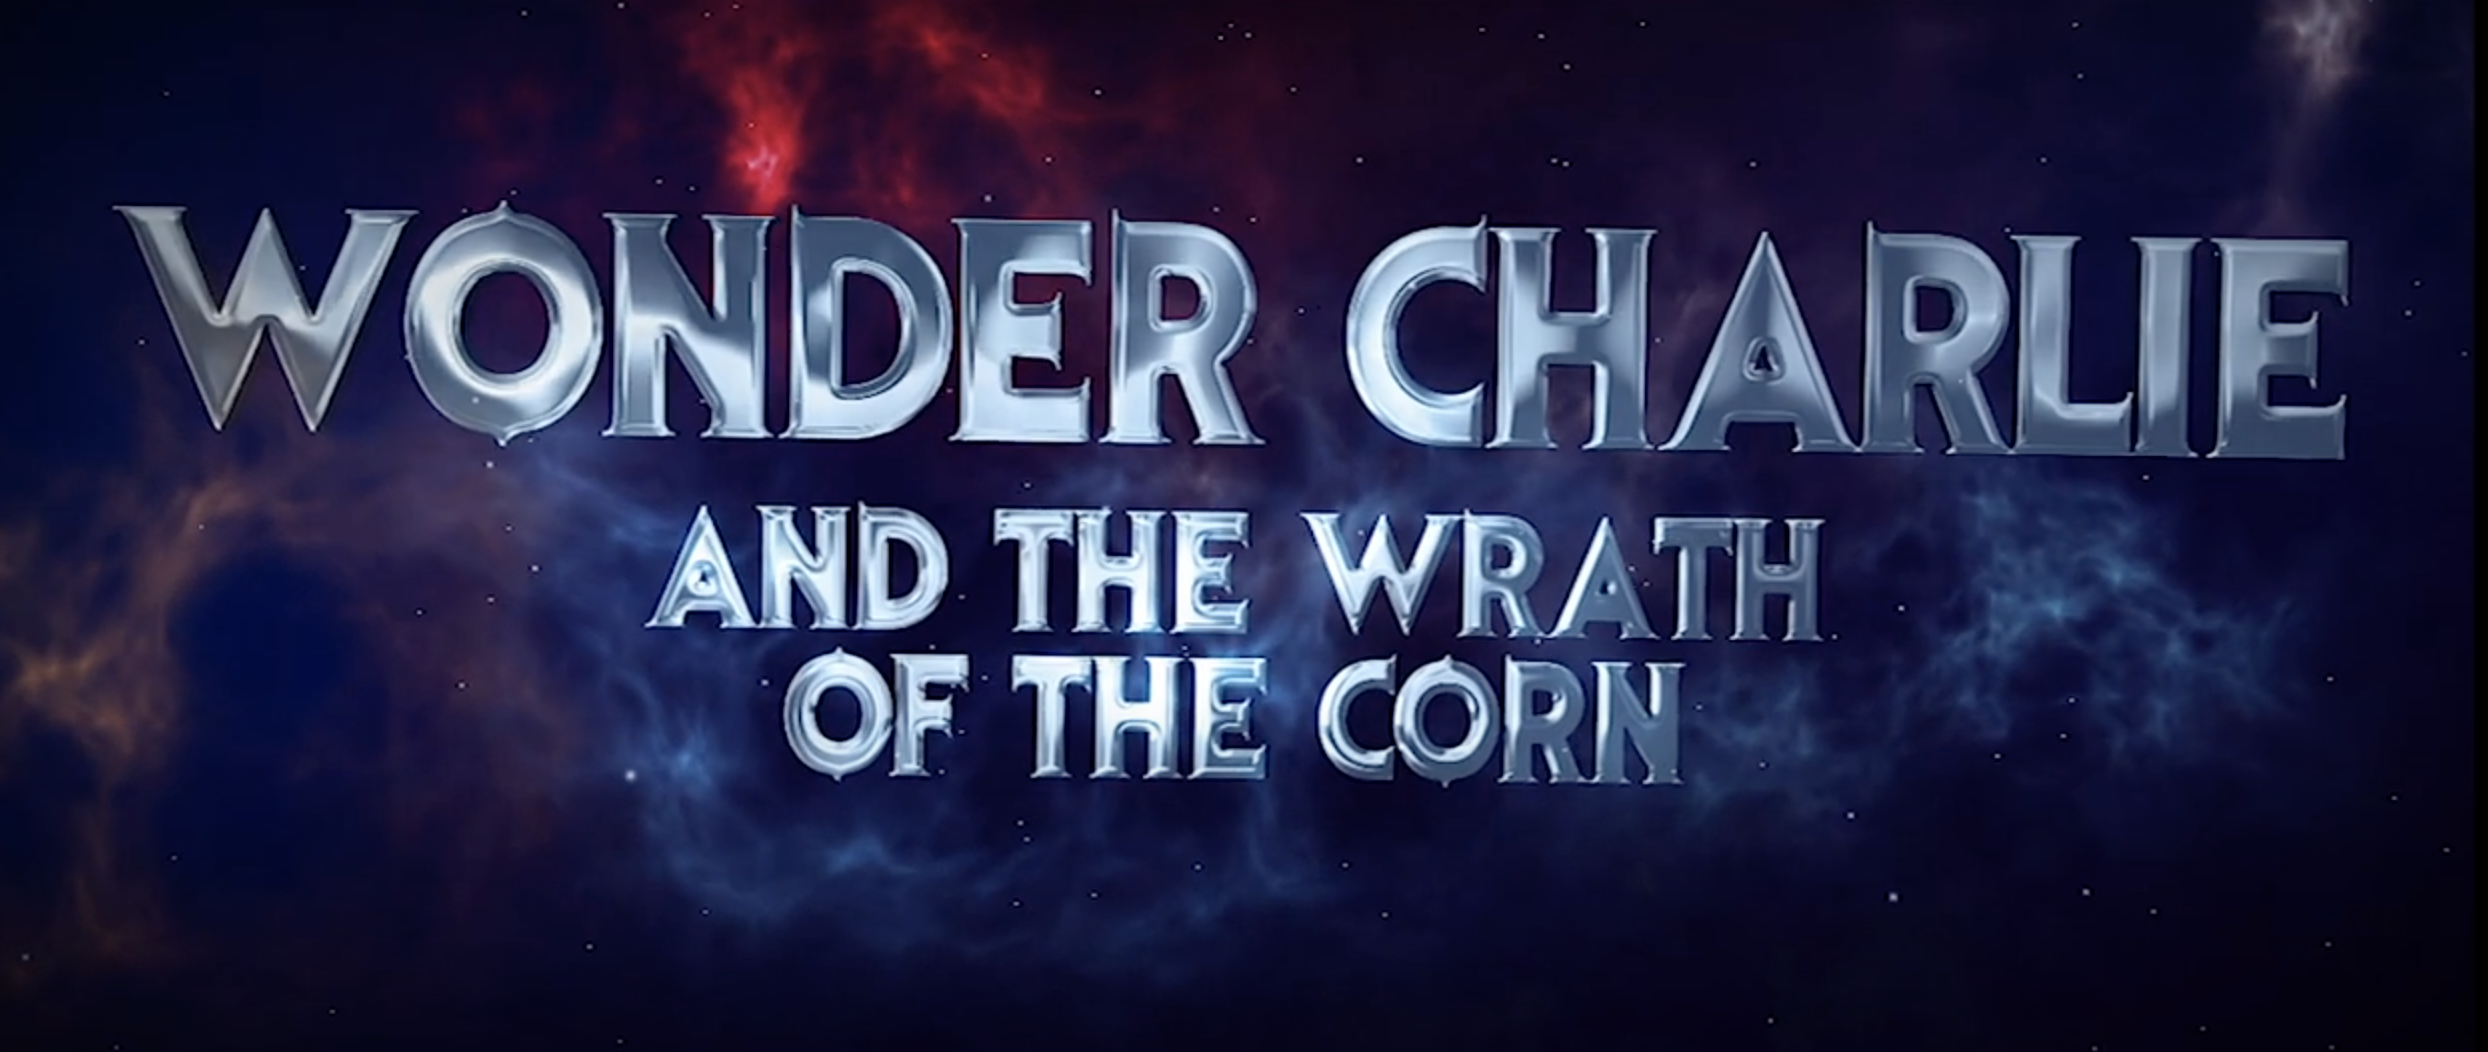 Wonder Charlie and the Wrath of the Corn